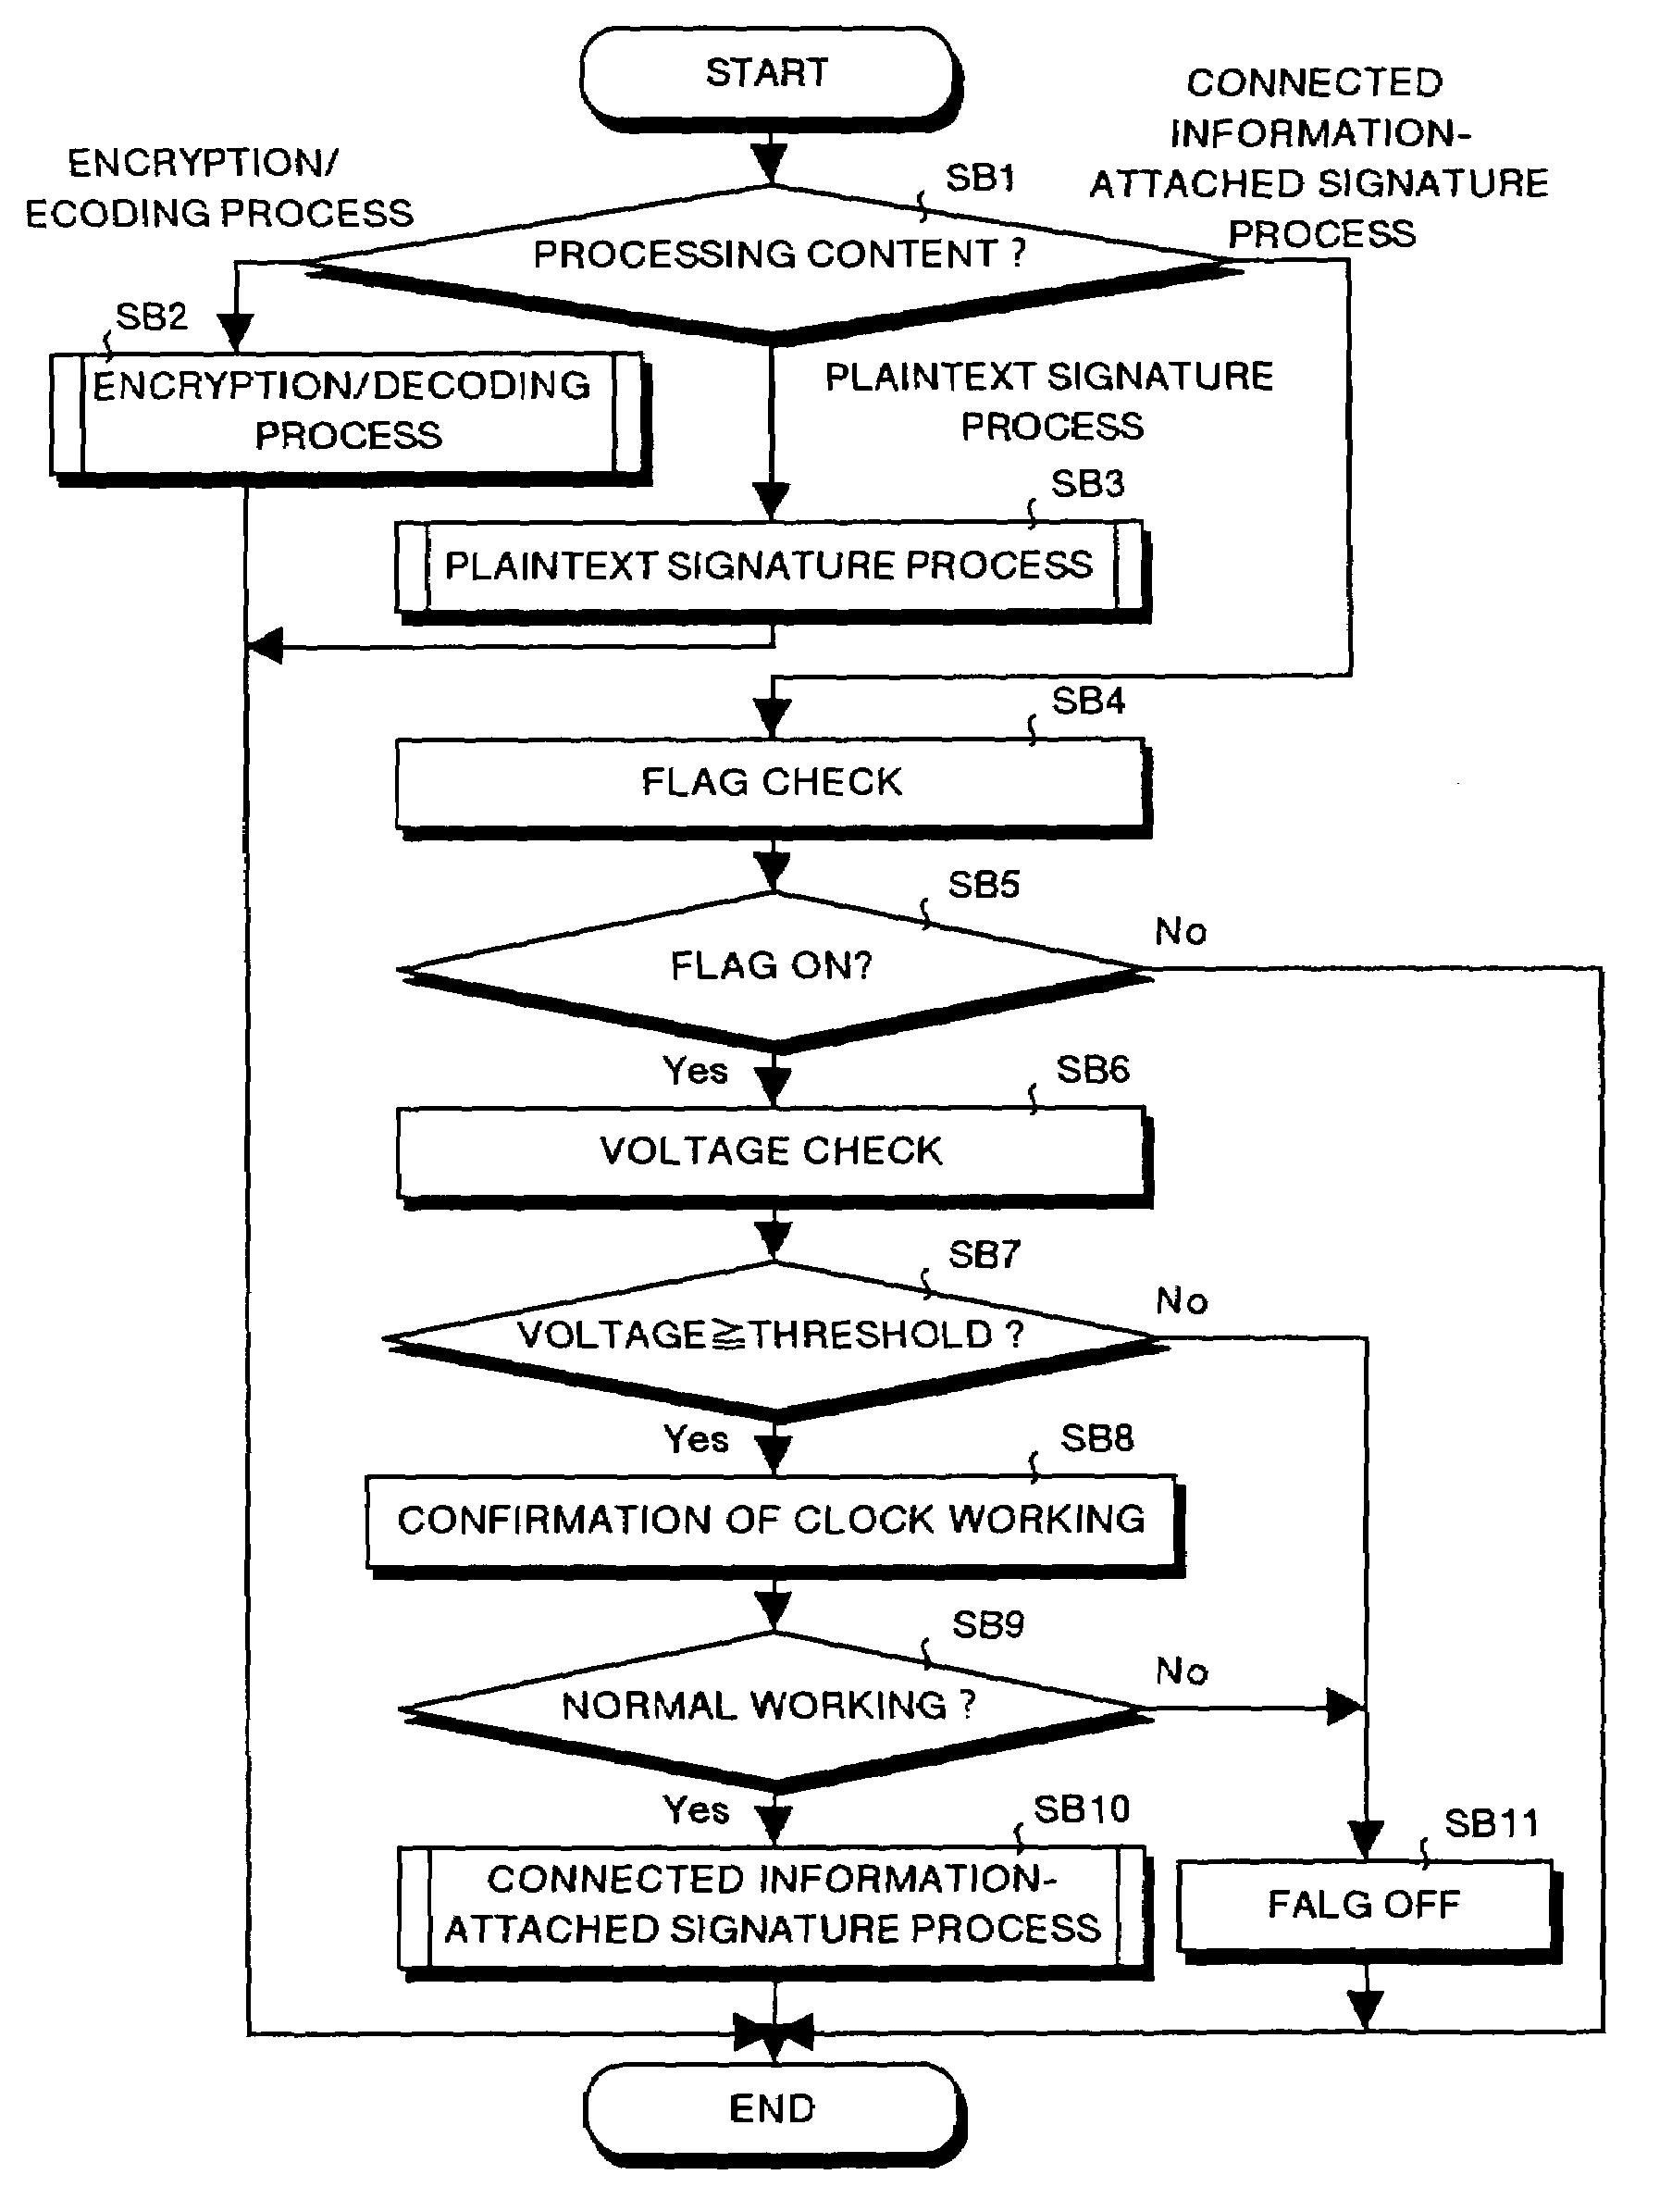 Apparatus to create and/or verify digital signatures having a secure time element and an identifier of the apparatus